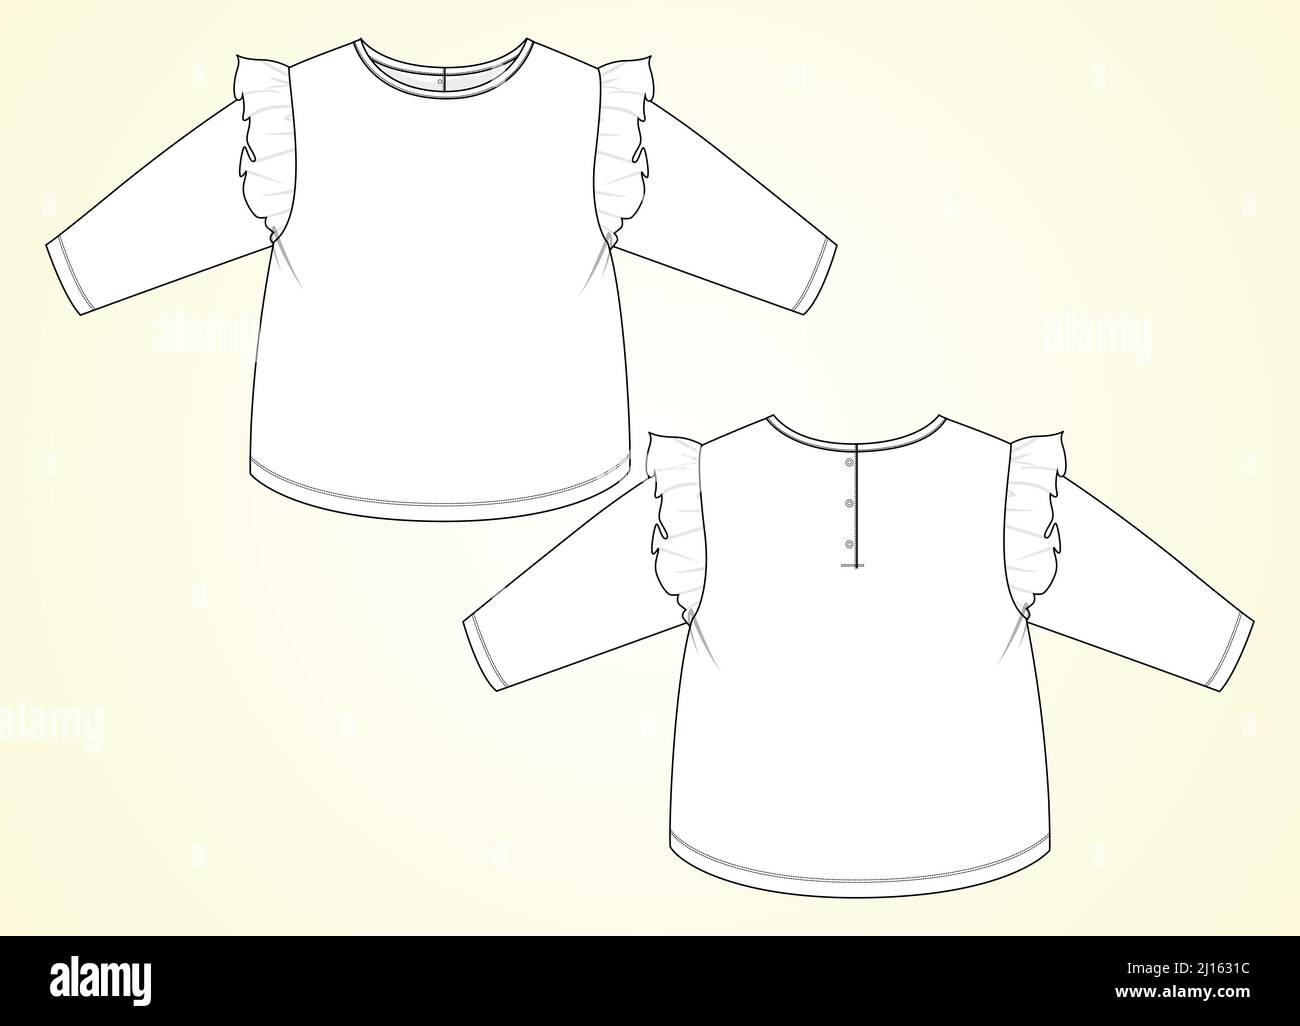 Ruffle blouse Stock Vector Images - Alamy